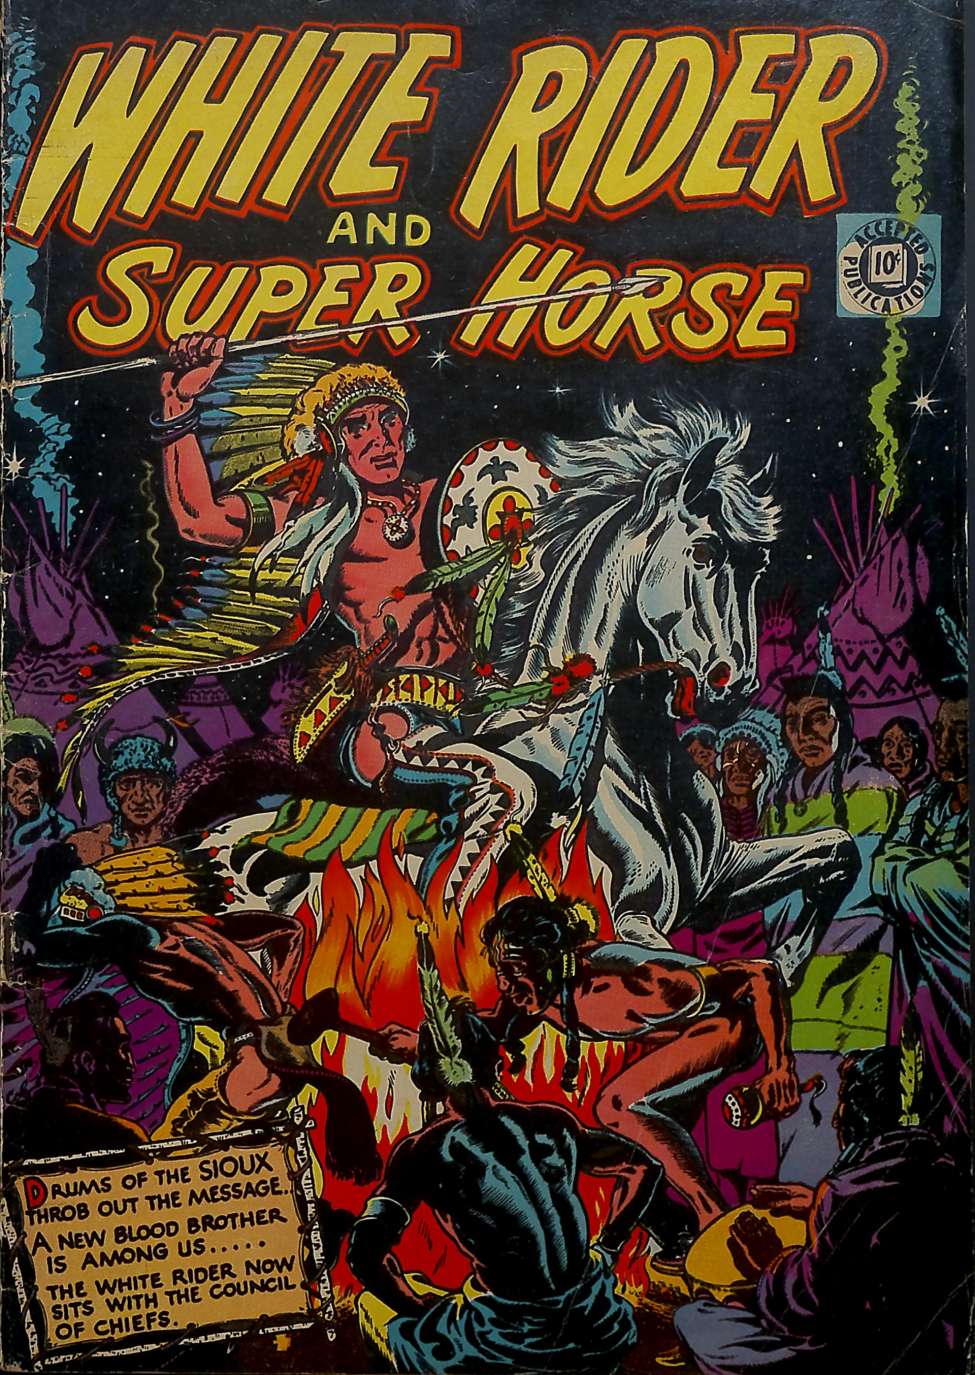 Book Cover For White Rider and Super Horse 6